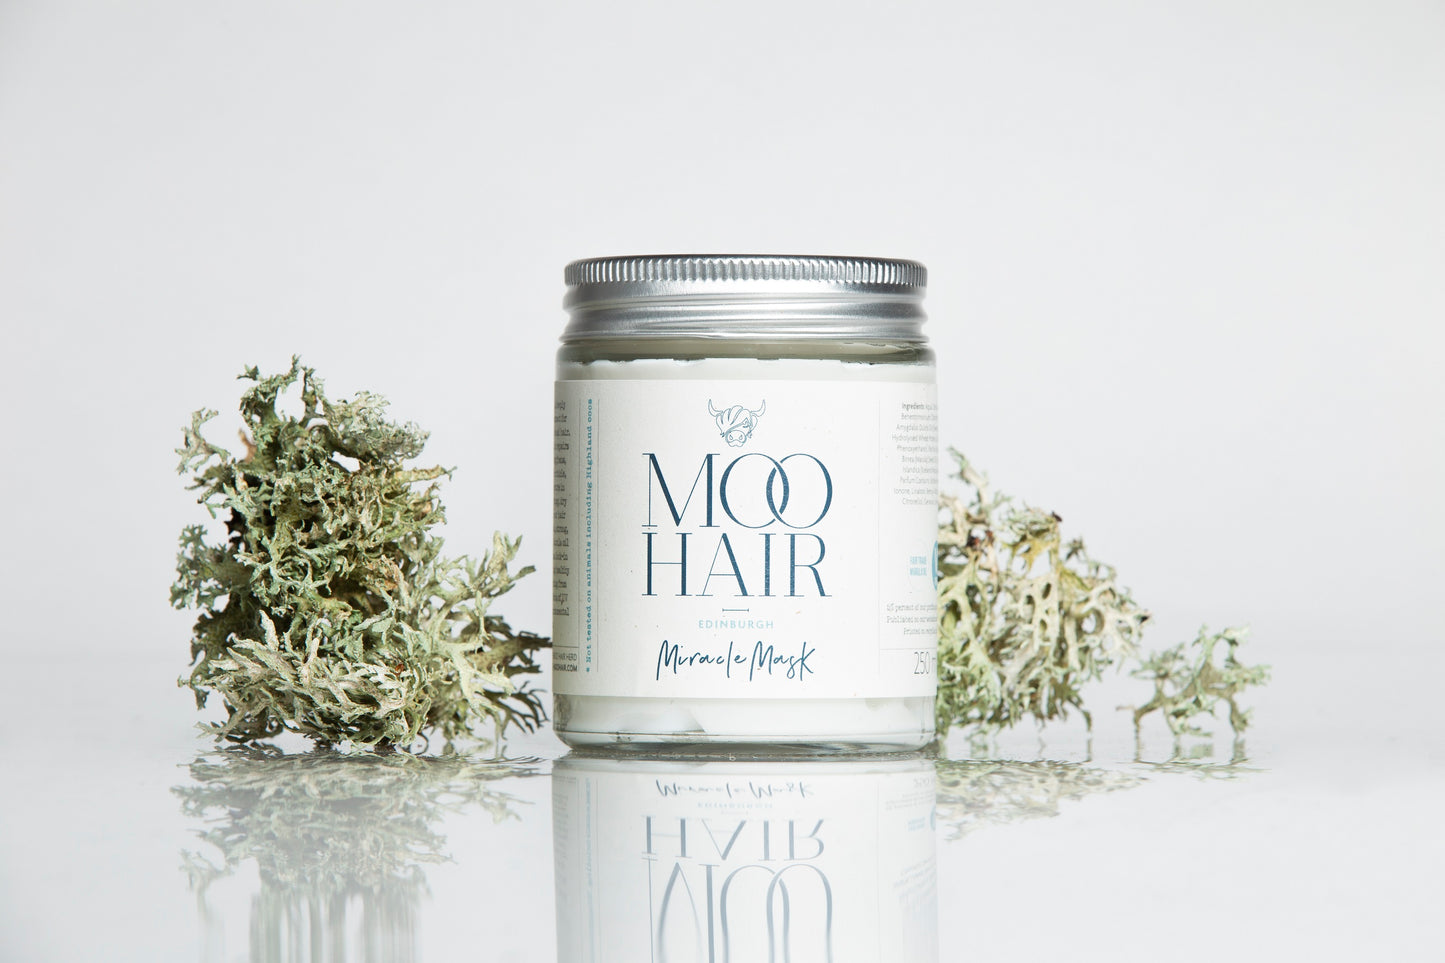 Moo Hair Miracle Mask | Leaves your hair feeling rehydrated, strong, silky and shiny | Cruelty Free | Natural Ingredients | Low Waste | Plastic Free